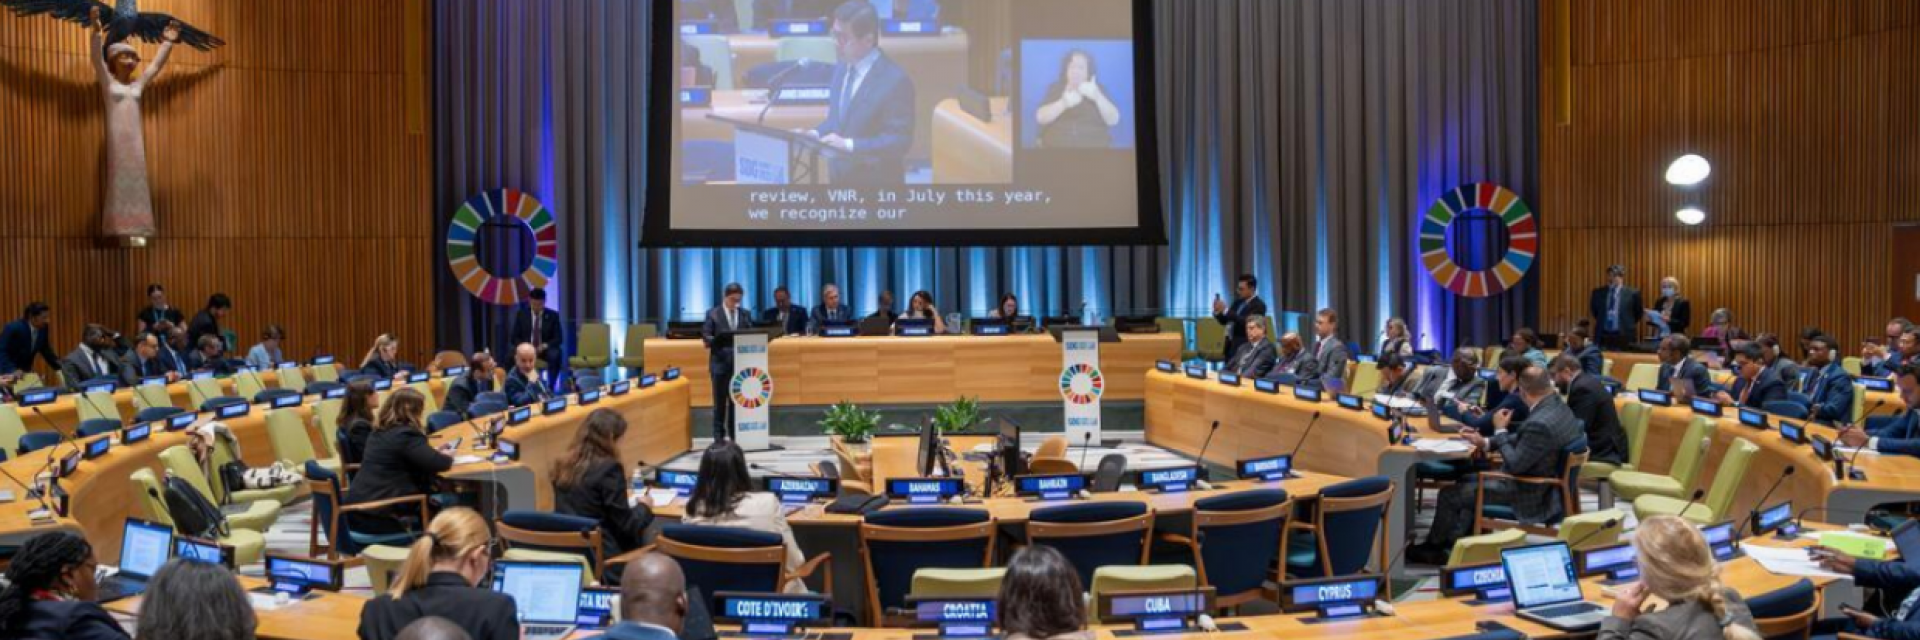 SDG Summit launches new phase of accelerated action on development